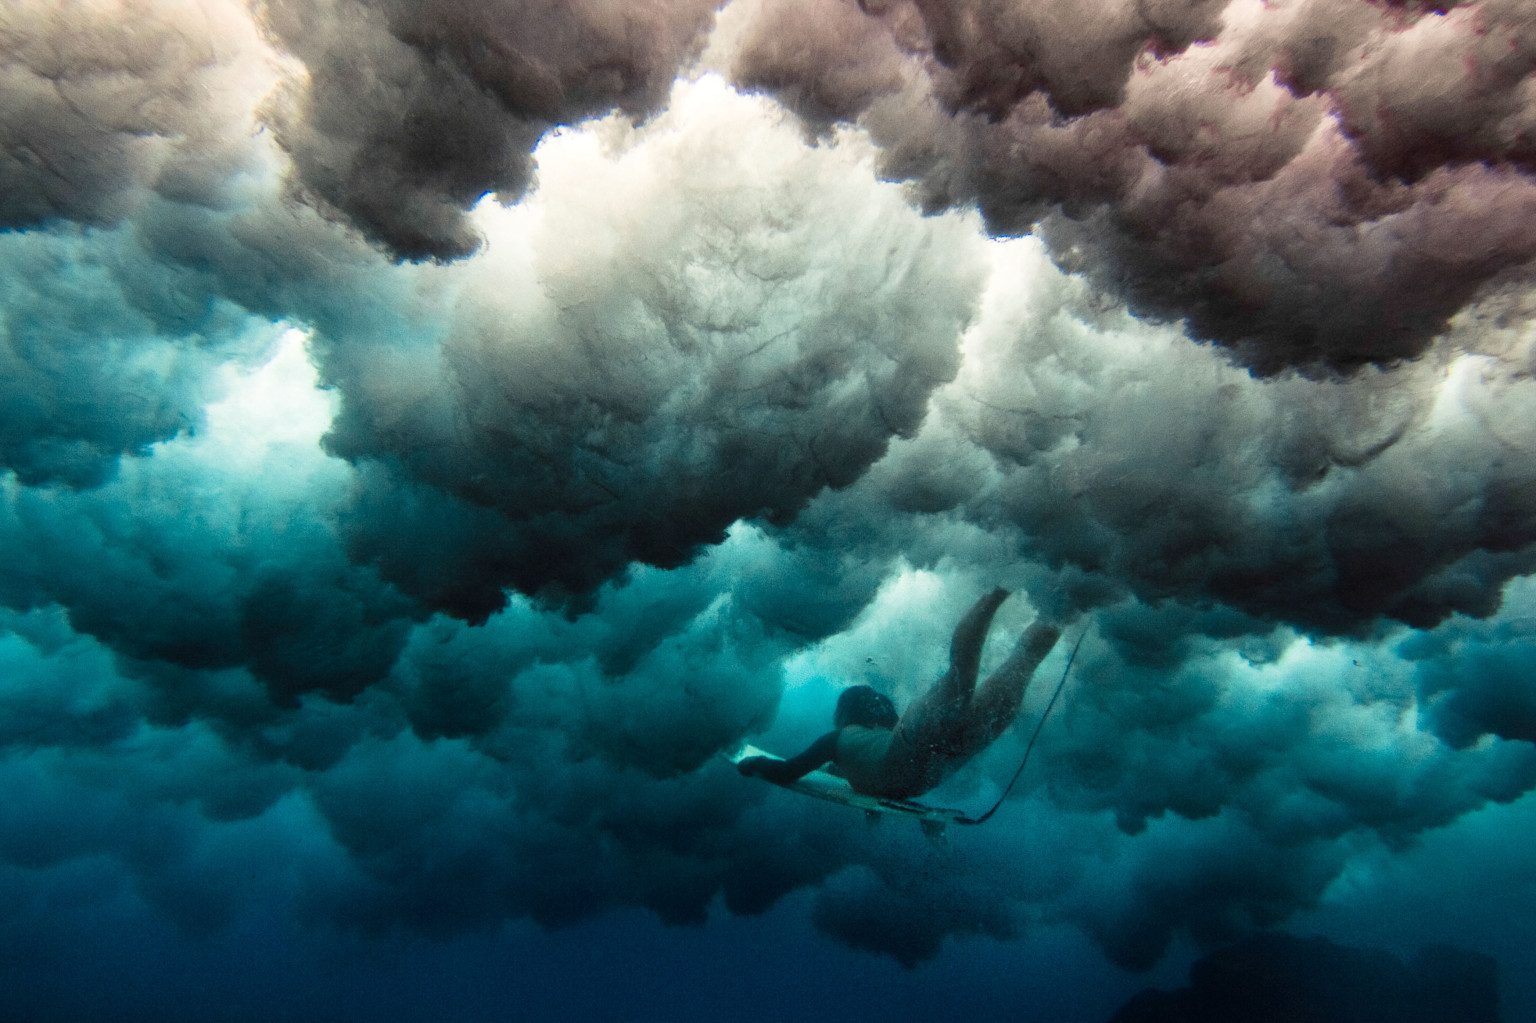 Underwater Surfing Photos Are Unlike Anything You've Ever ...